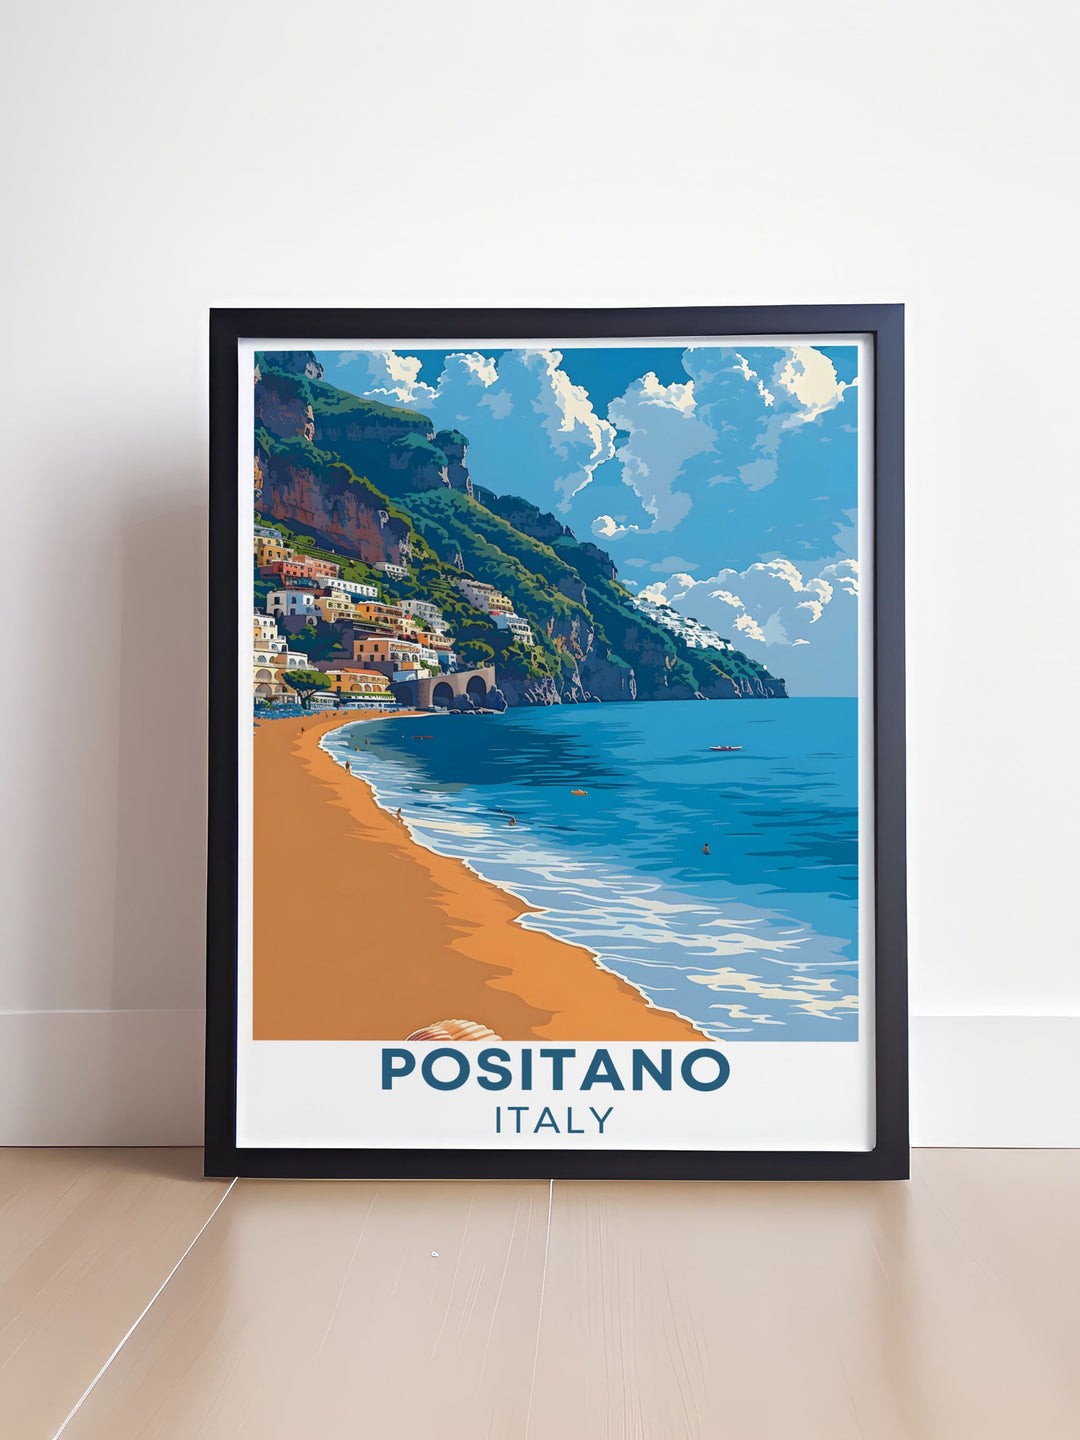 Positano wall art depicting the picturesque Spiaggia Grande perfect for creating a captivating focal point in your home decor and bringing the vibrant and peaceful ambiance of the Amalfi Coast to your interior design